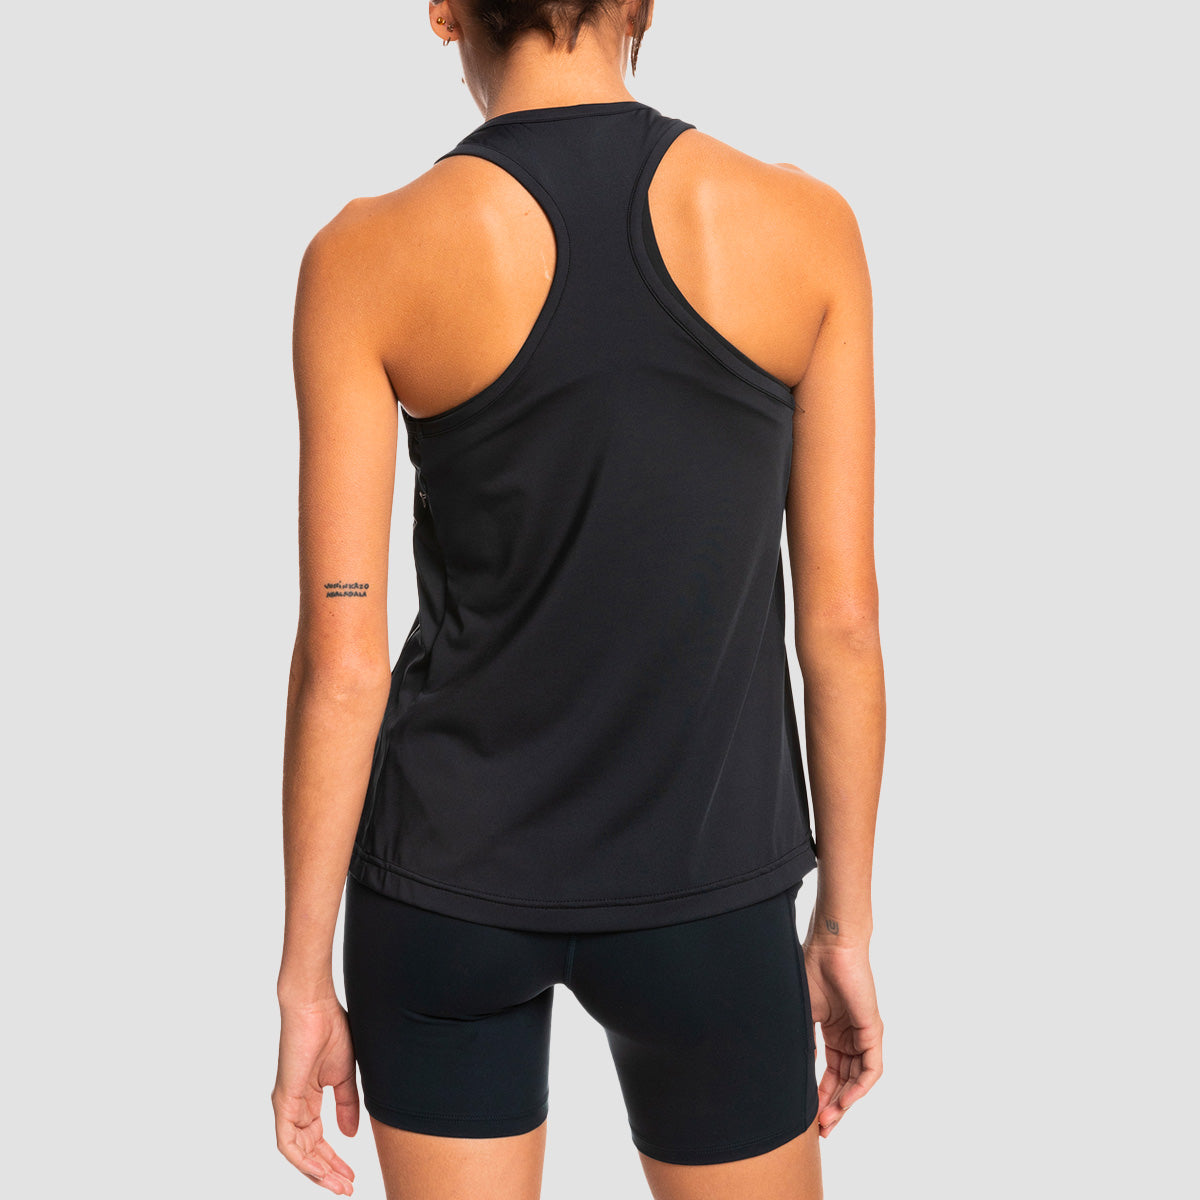 Roxy Bold Moves Sports Vest Top Anthracite - Womens